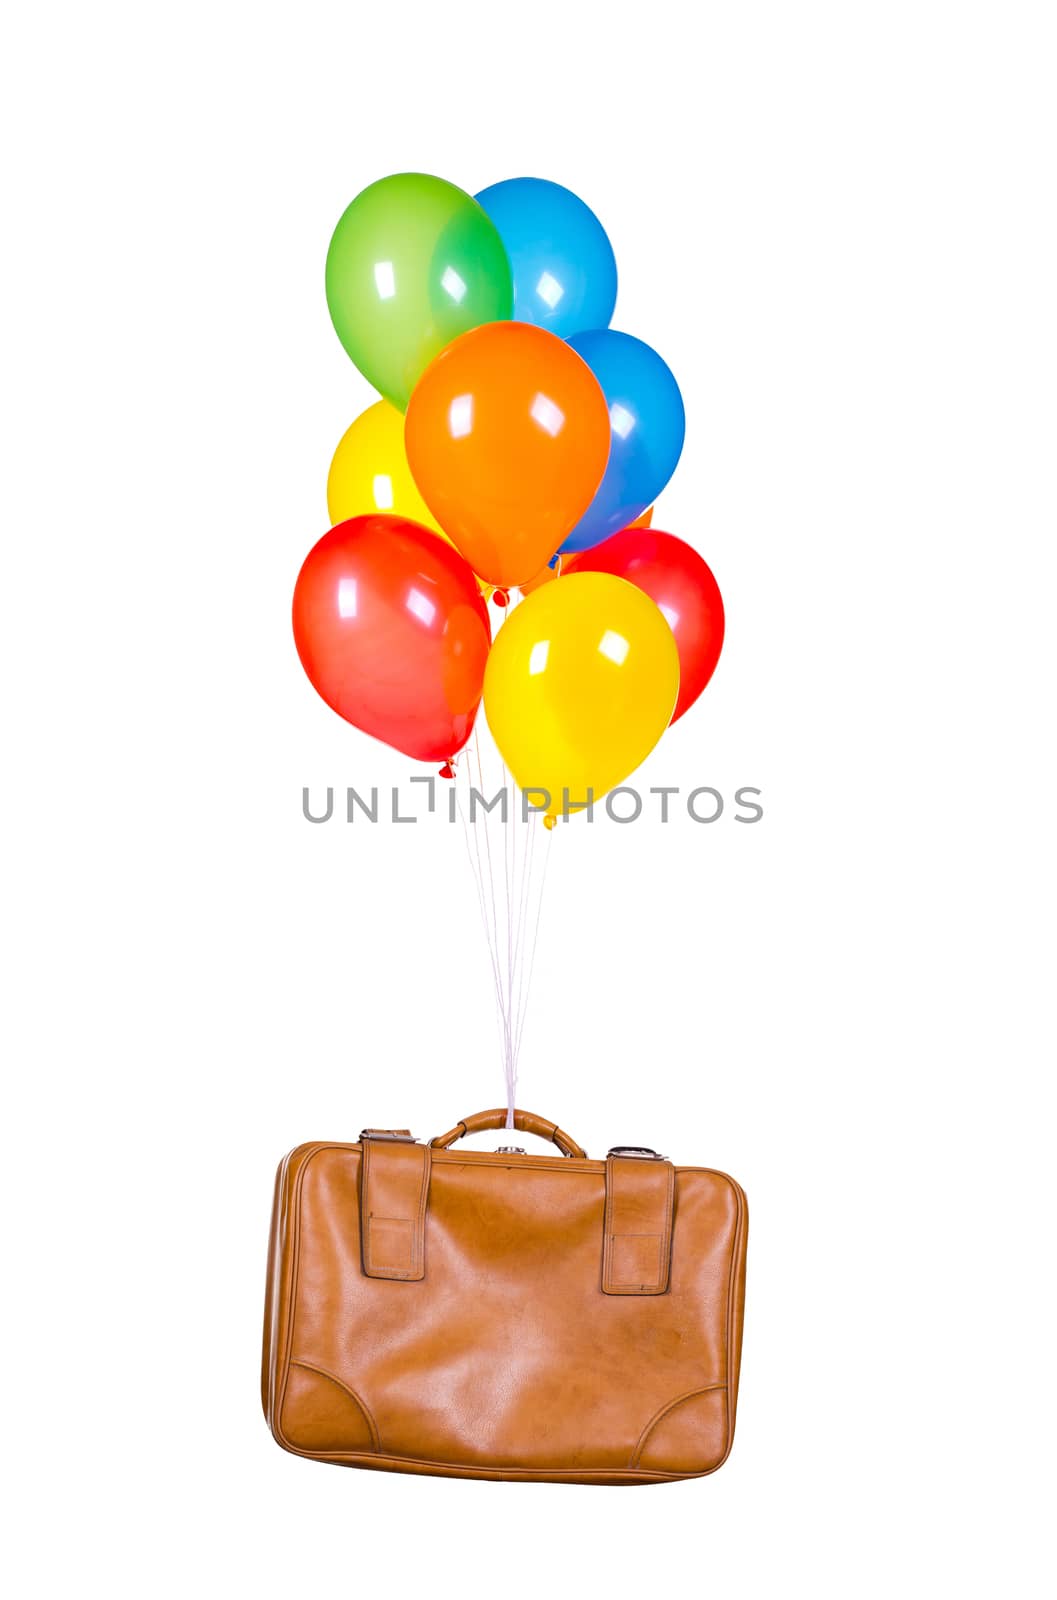 balloons with old suitcase